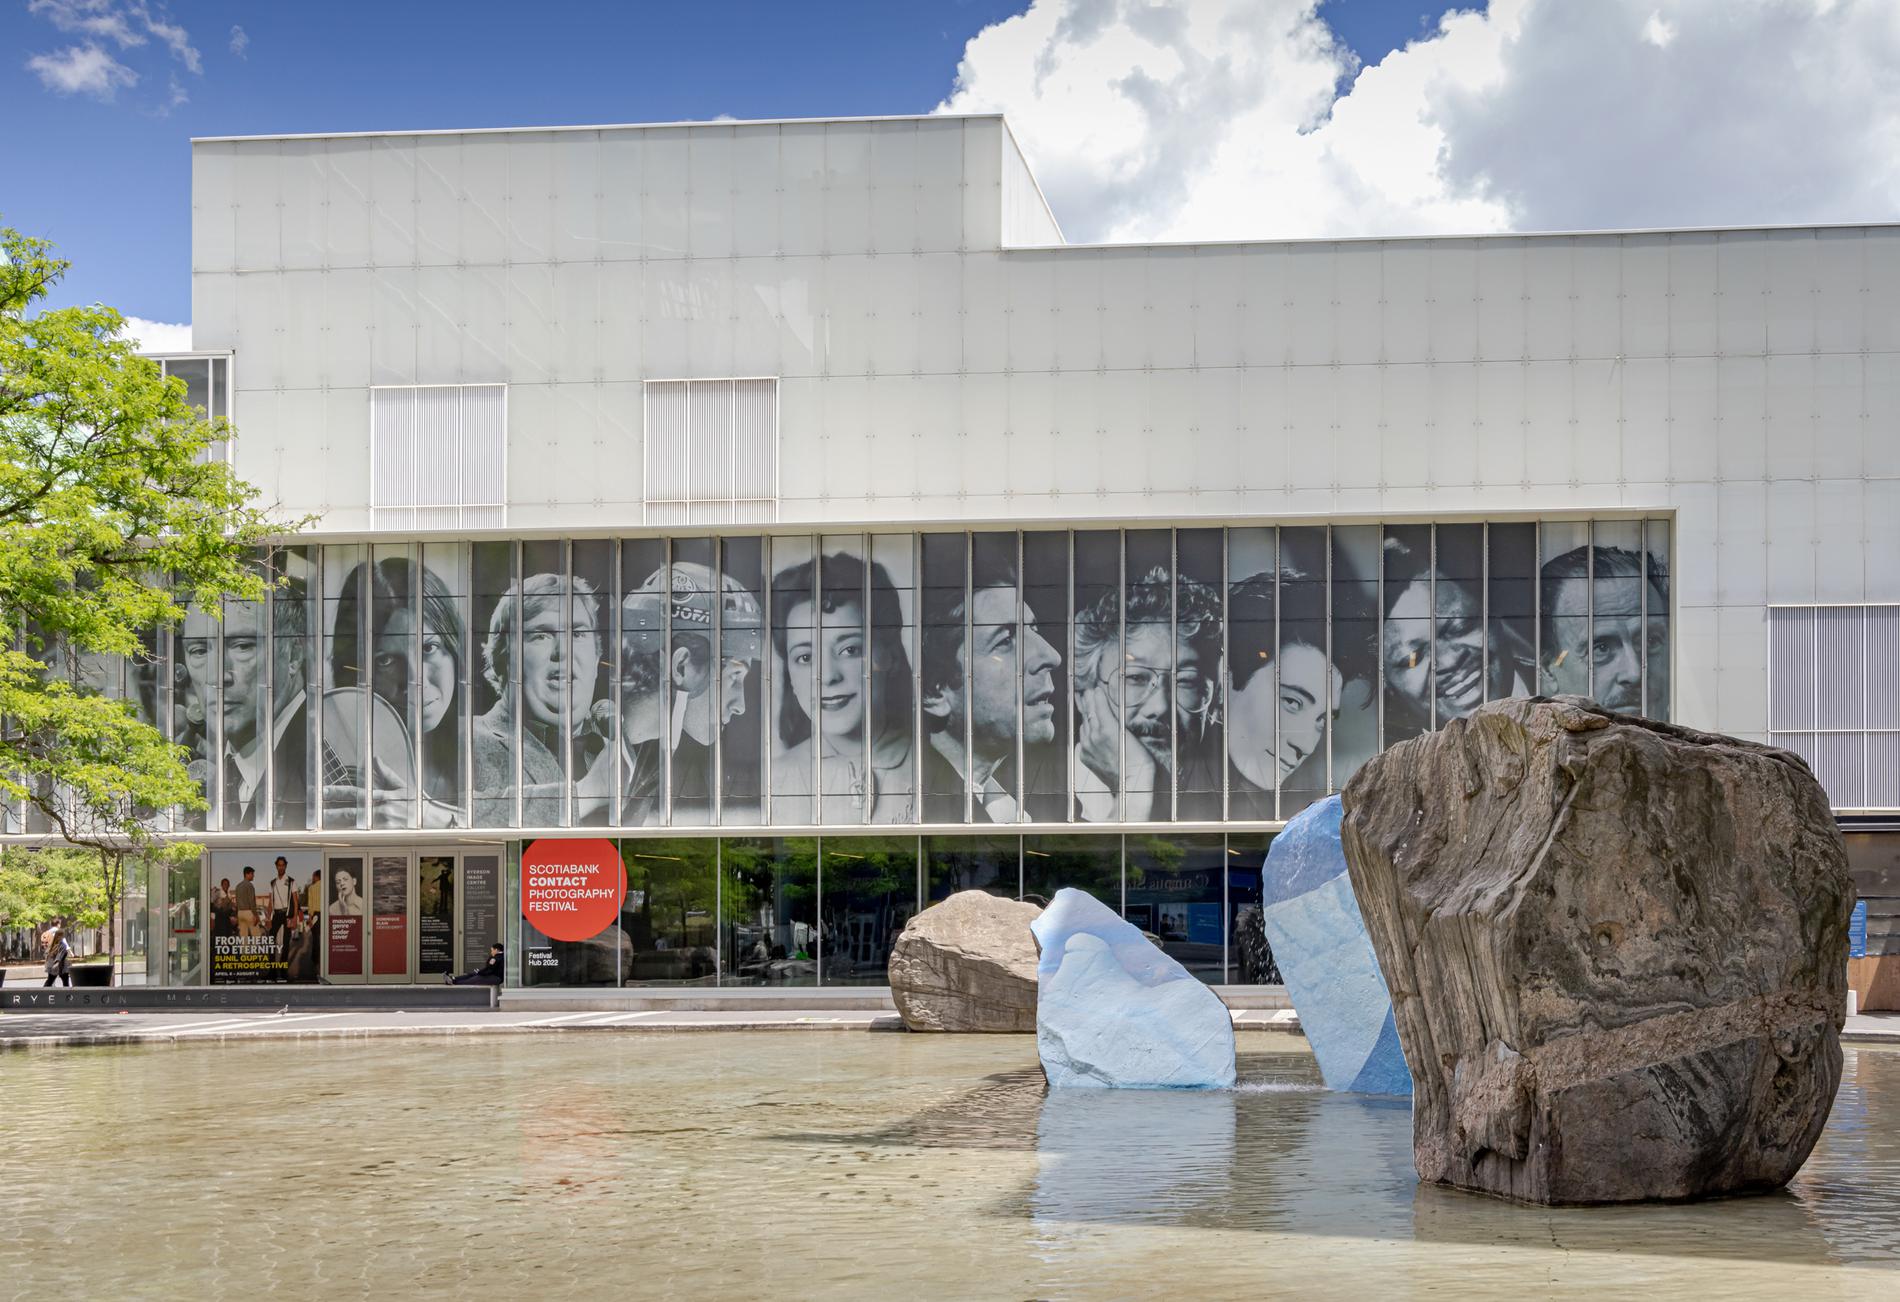 exterior photo of The Image Centre building with an art installation on boulders in the pond in front of it